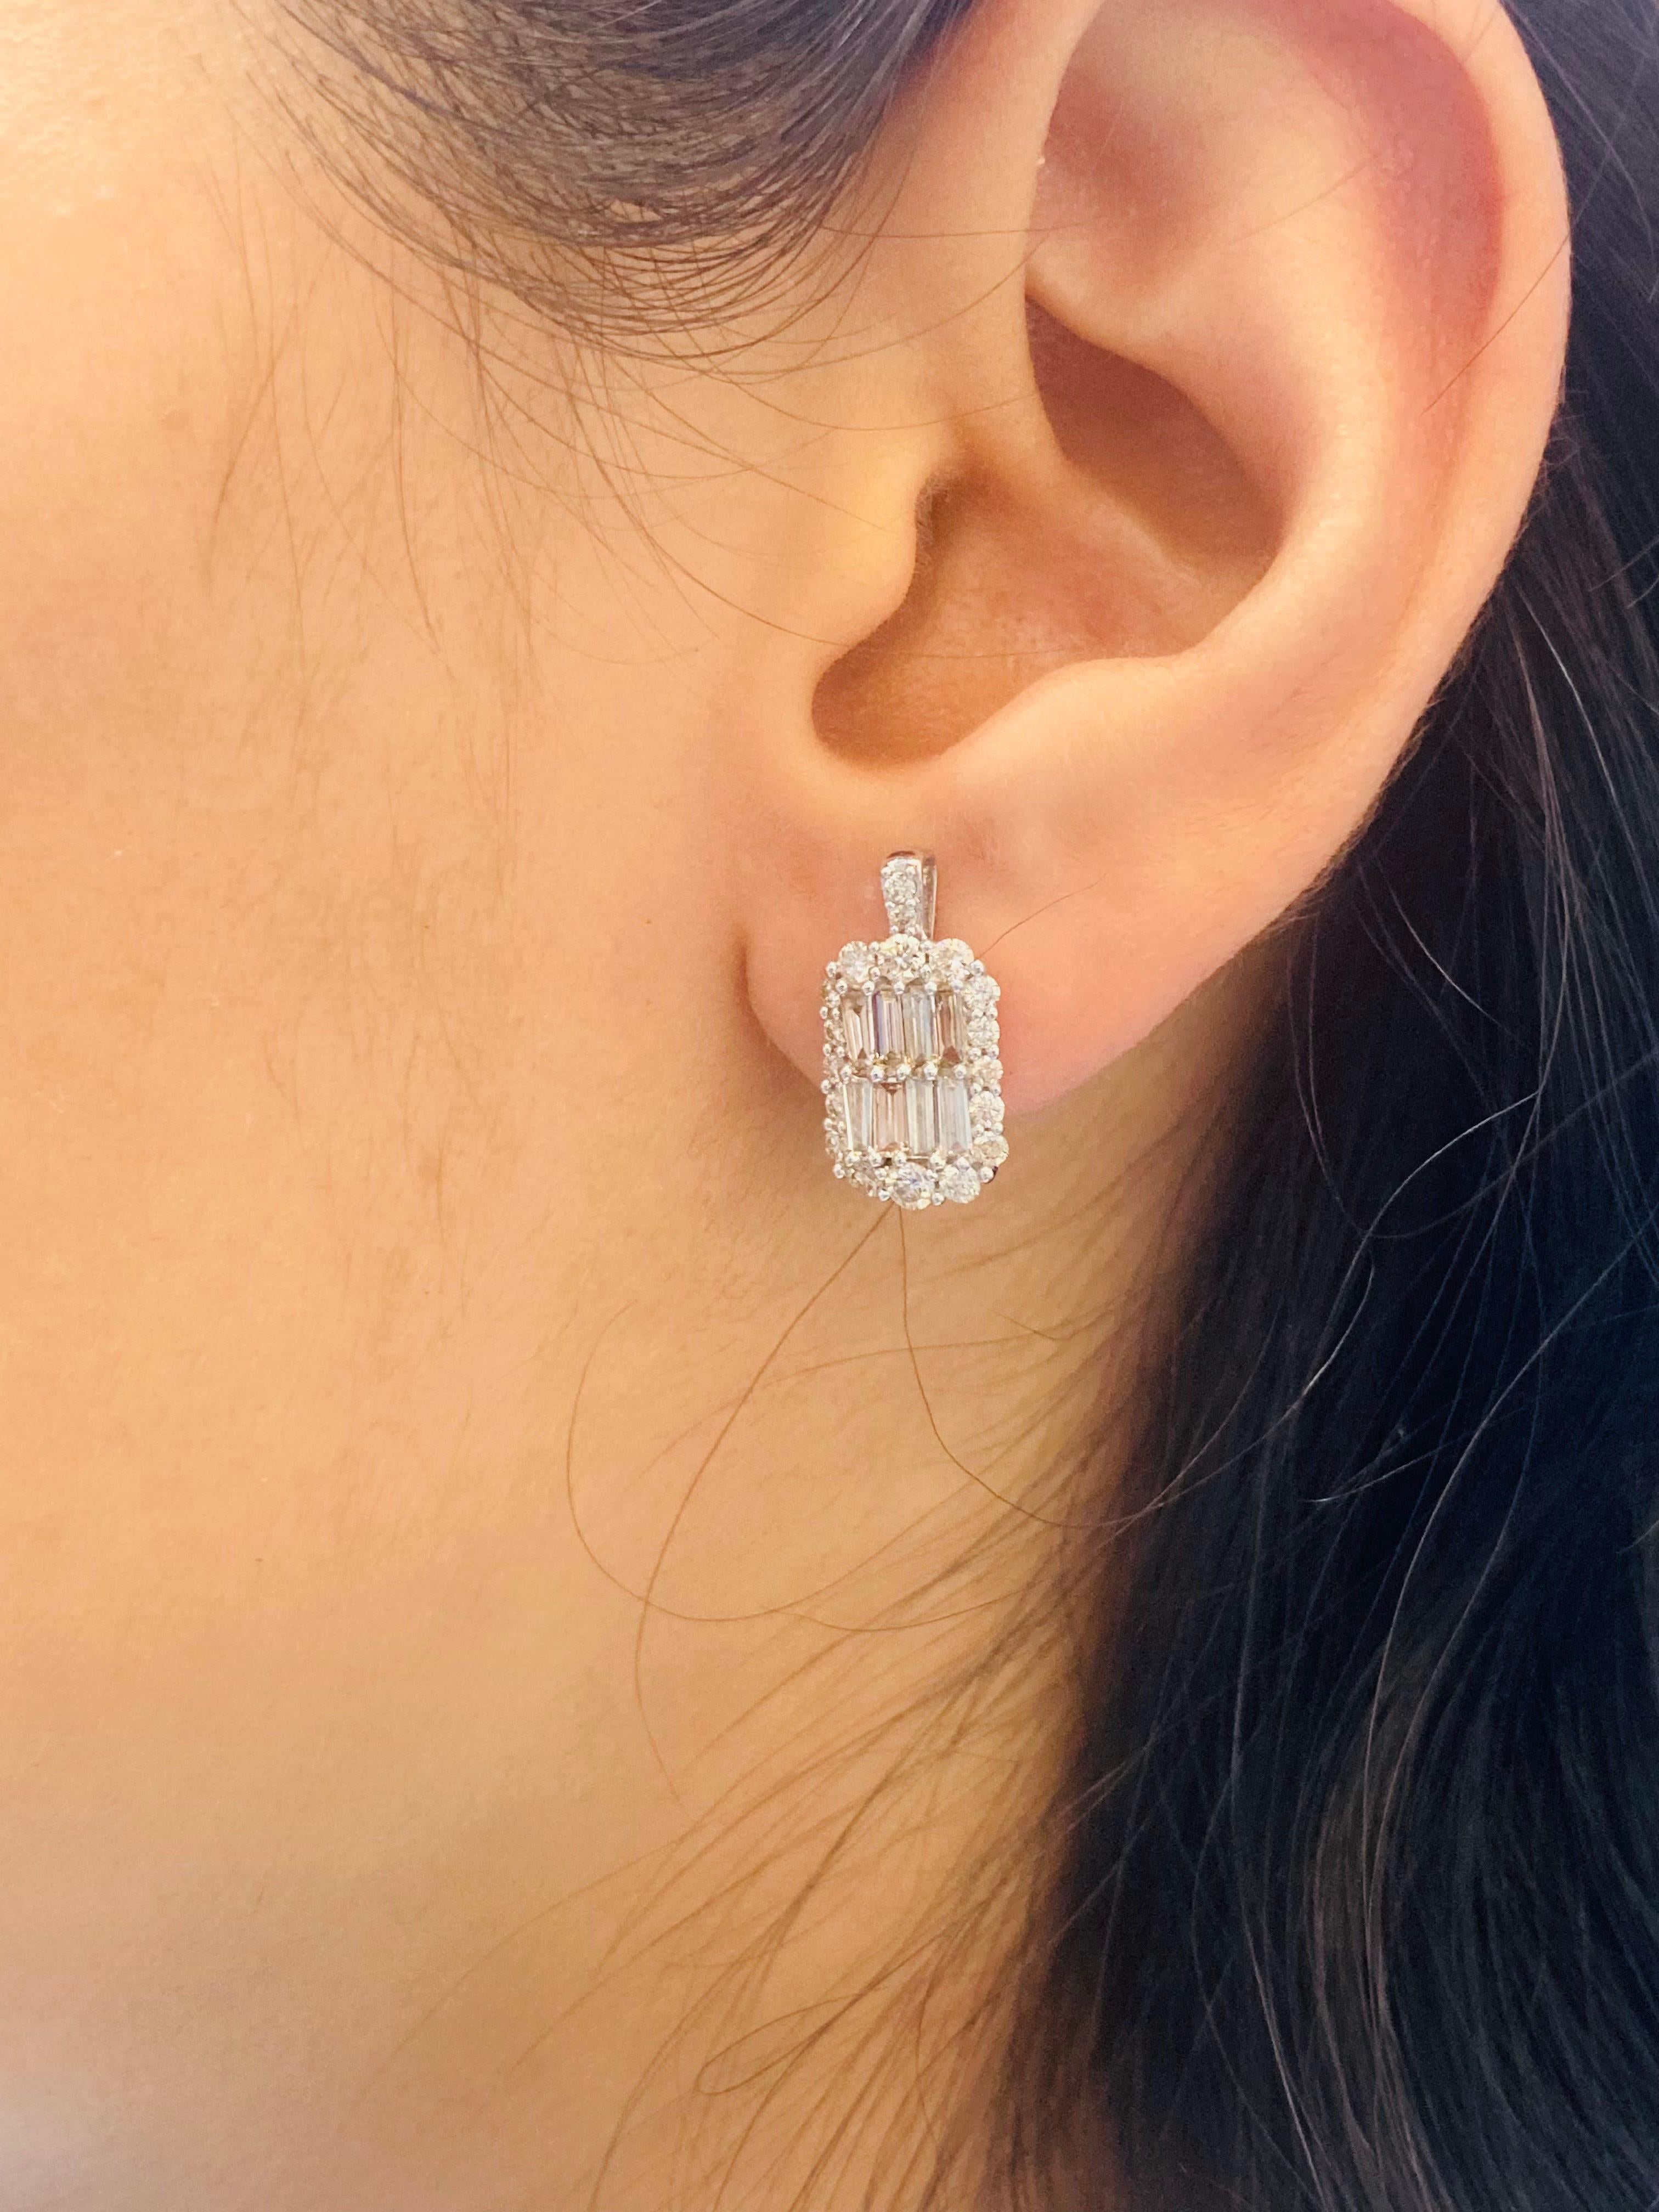 Bochic “Retro Vintage” Round & Baguette Diamond Earrings Set In 18K Gold  In New Condition For Sale In New York, NY